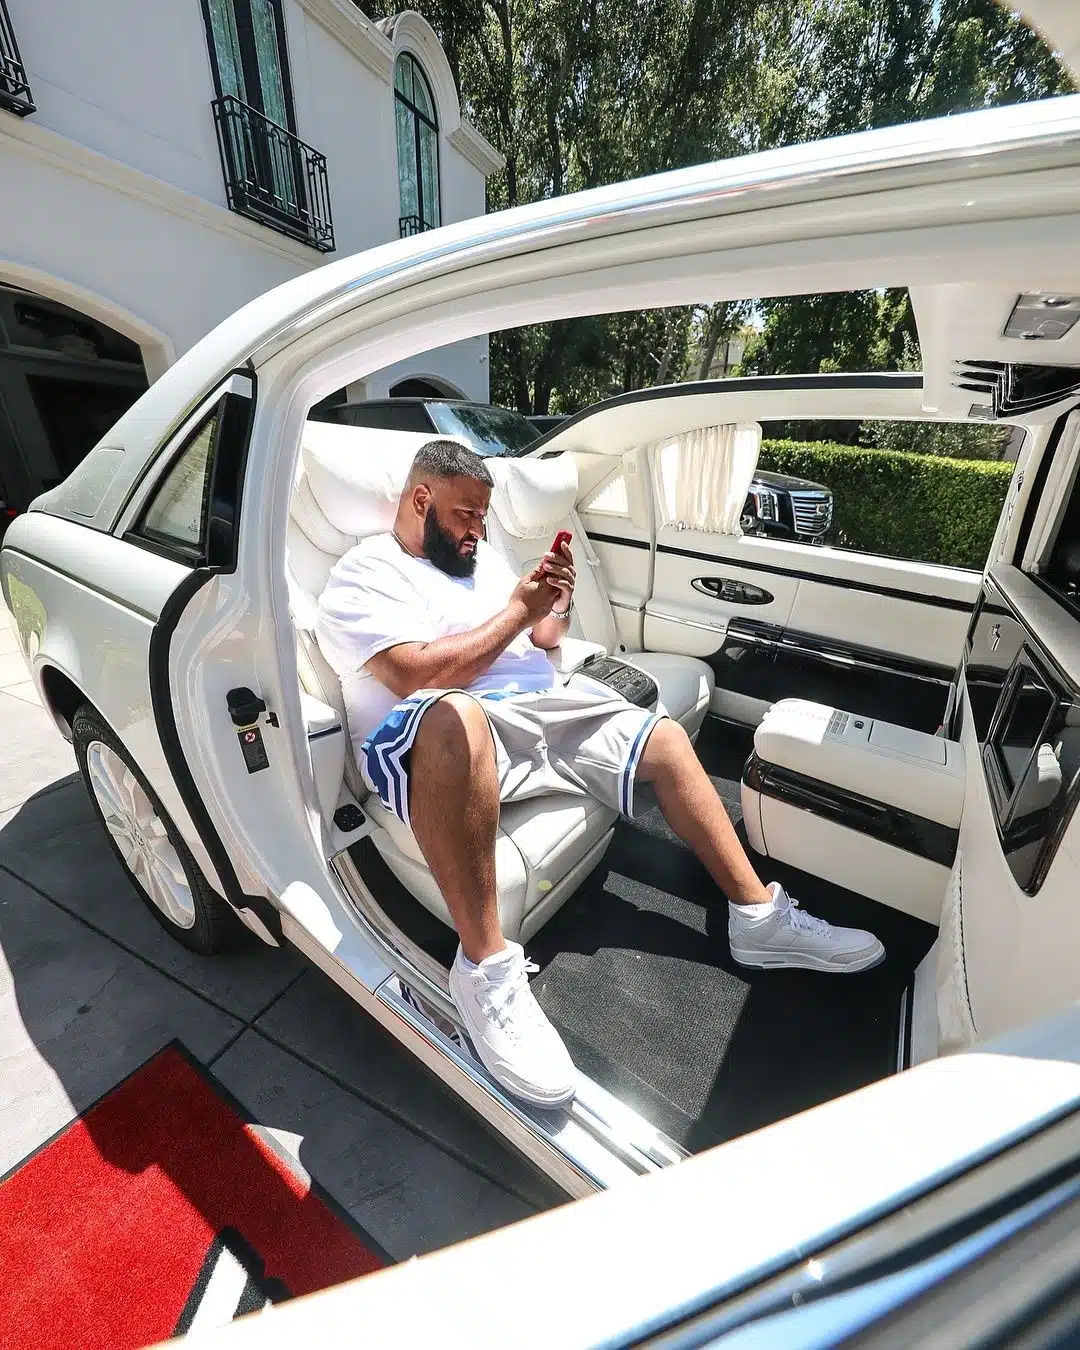 Whether flying or driving DJ Khaled travels in outrageous luxury